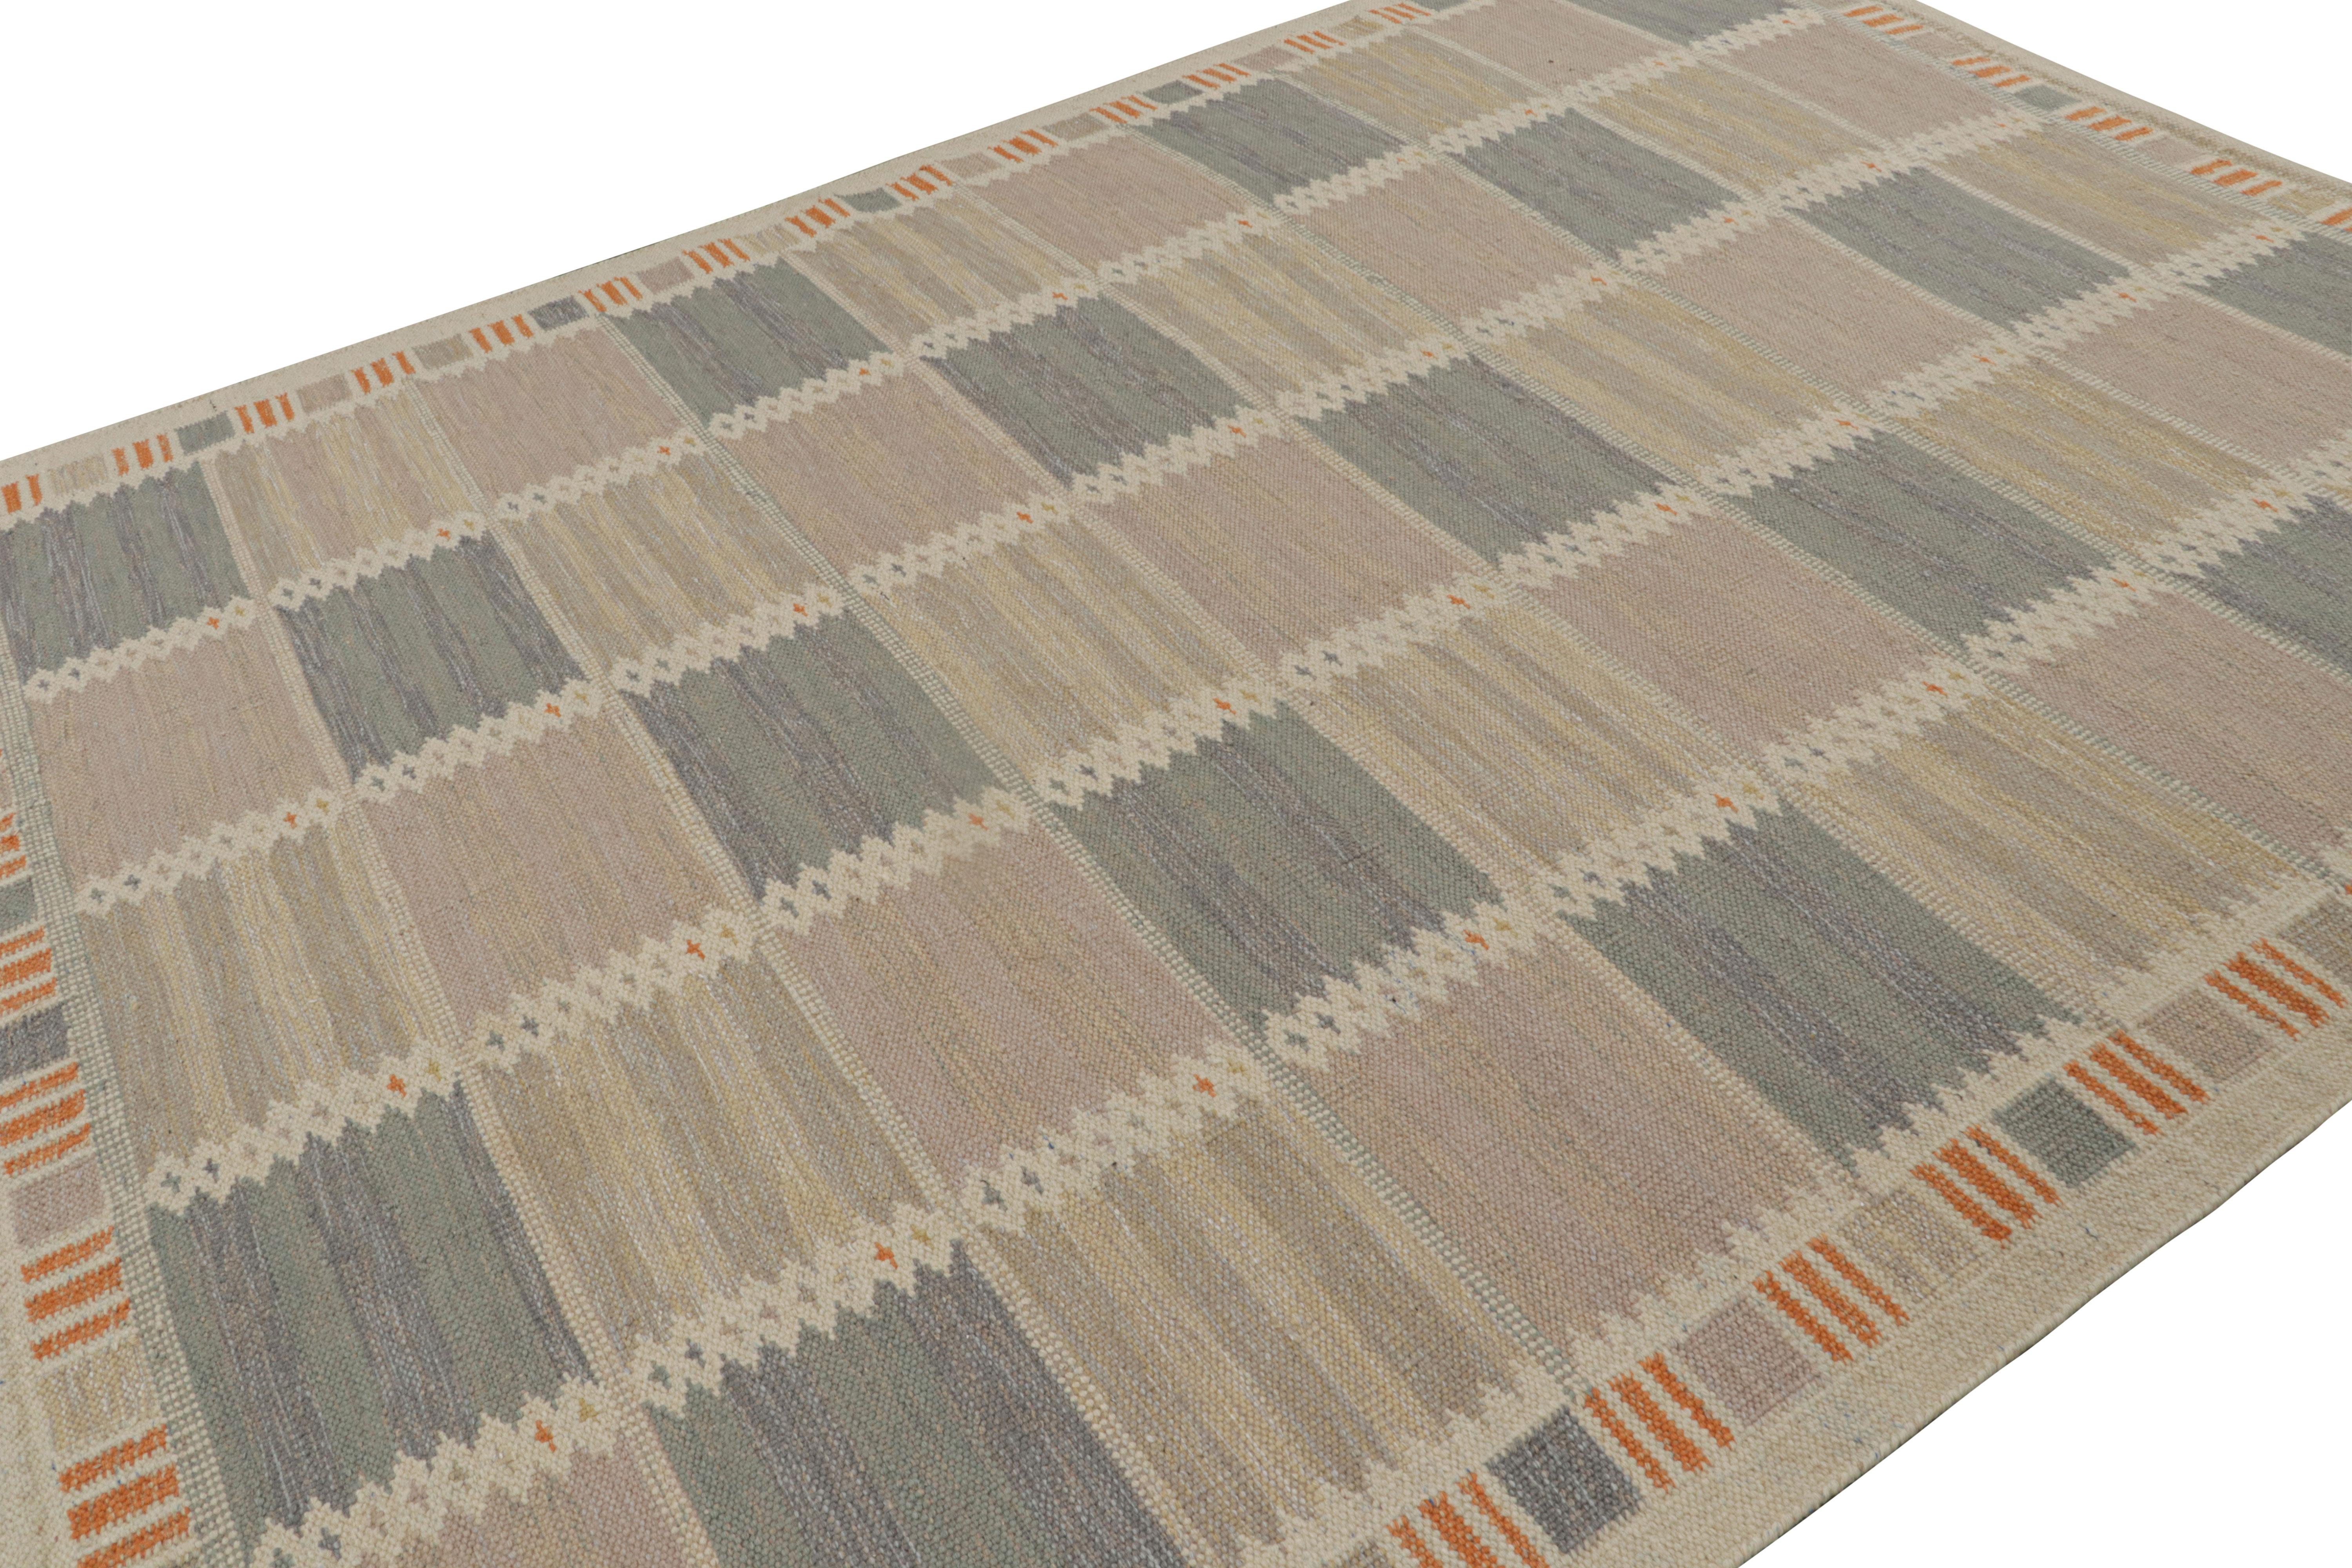 This 9×12 Swedish style kilim rug is from the award-winning Scandinavian rug collection by Rug & Kilim. Handwoven in wool and other undyed, natural yarns, this flatweave is inspired by Swedish Deco Rollakan and Rya rugs.

On the Design:

This